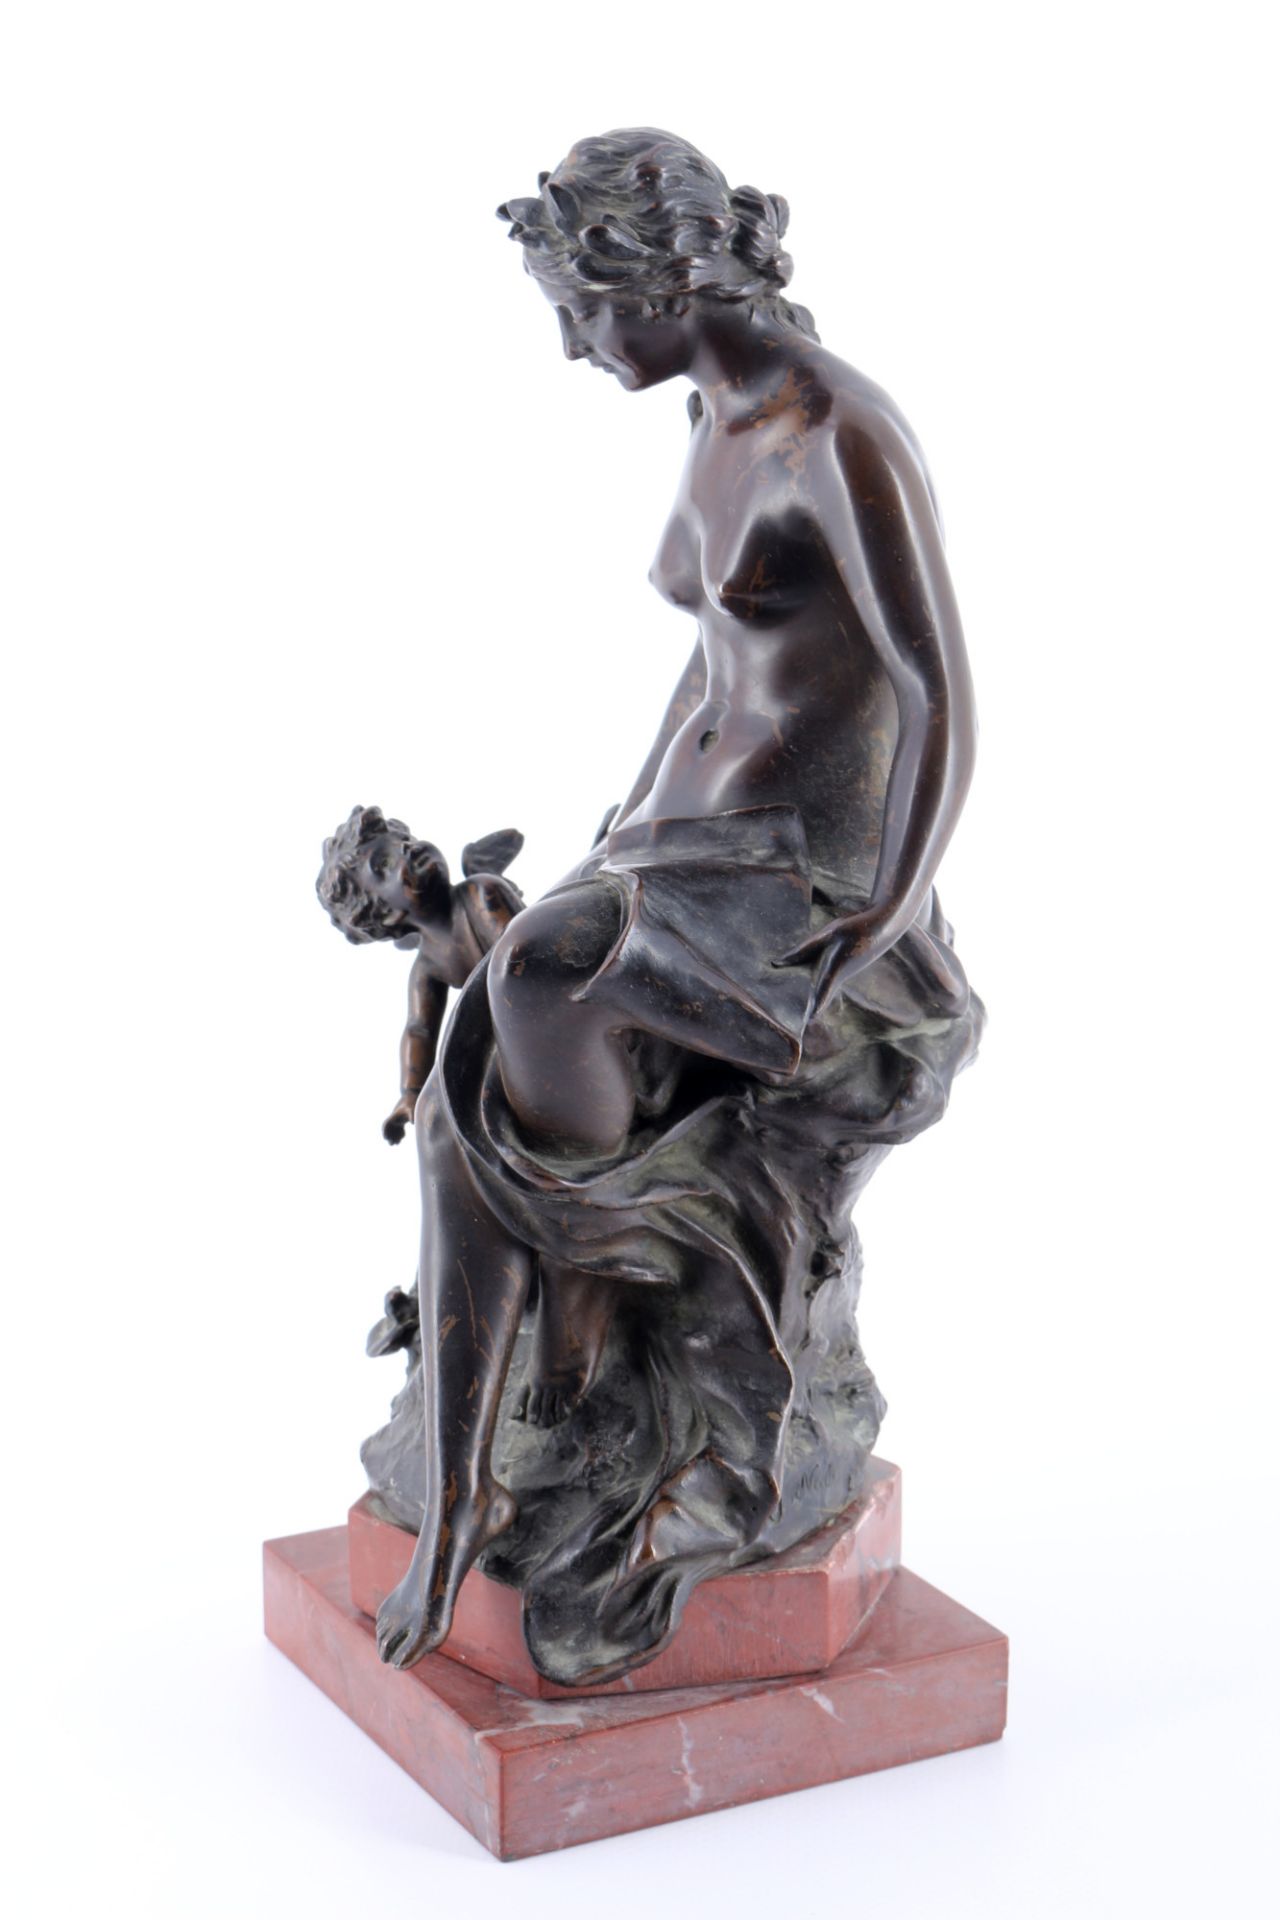 19th century sculptor, J. NEELS, female nude with Cupid, Frauenakt mit Amor - Image 2 of 6